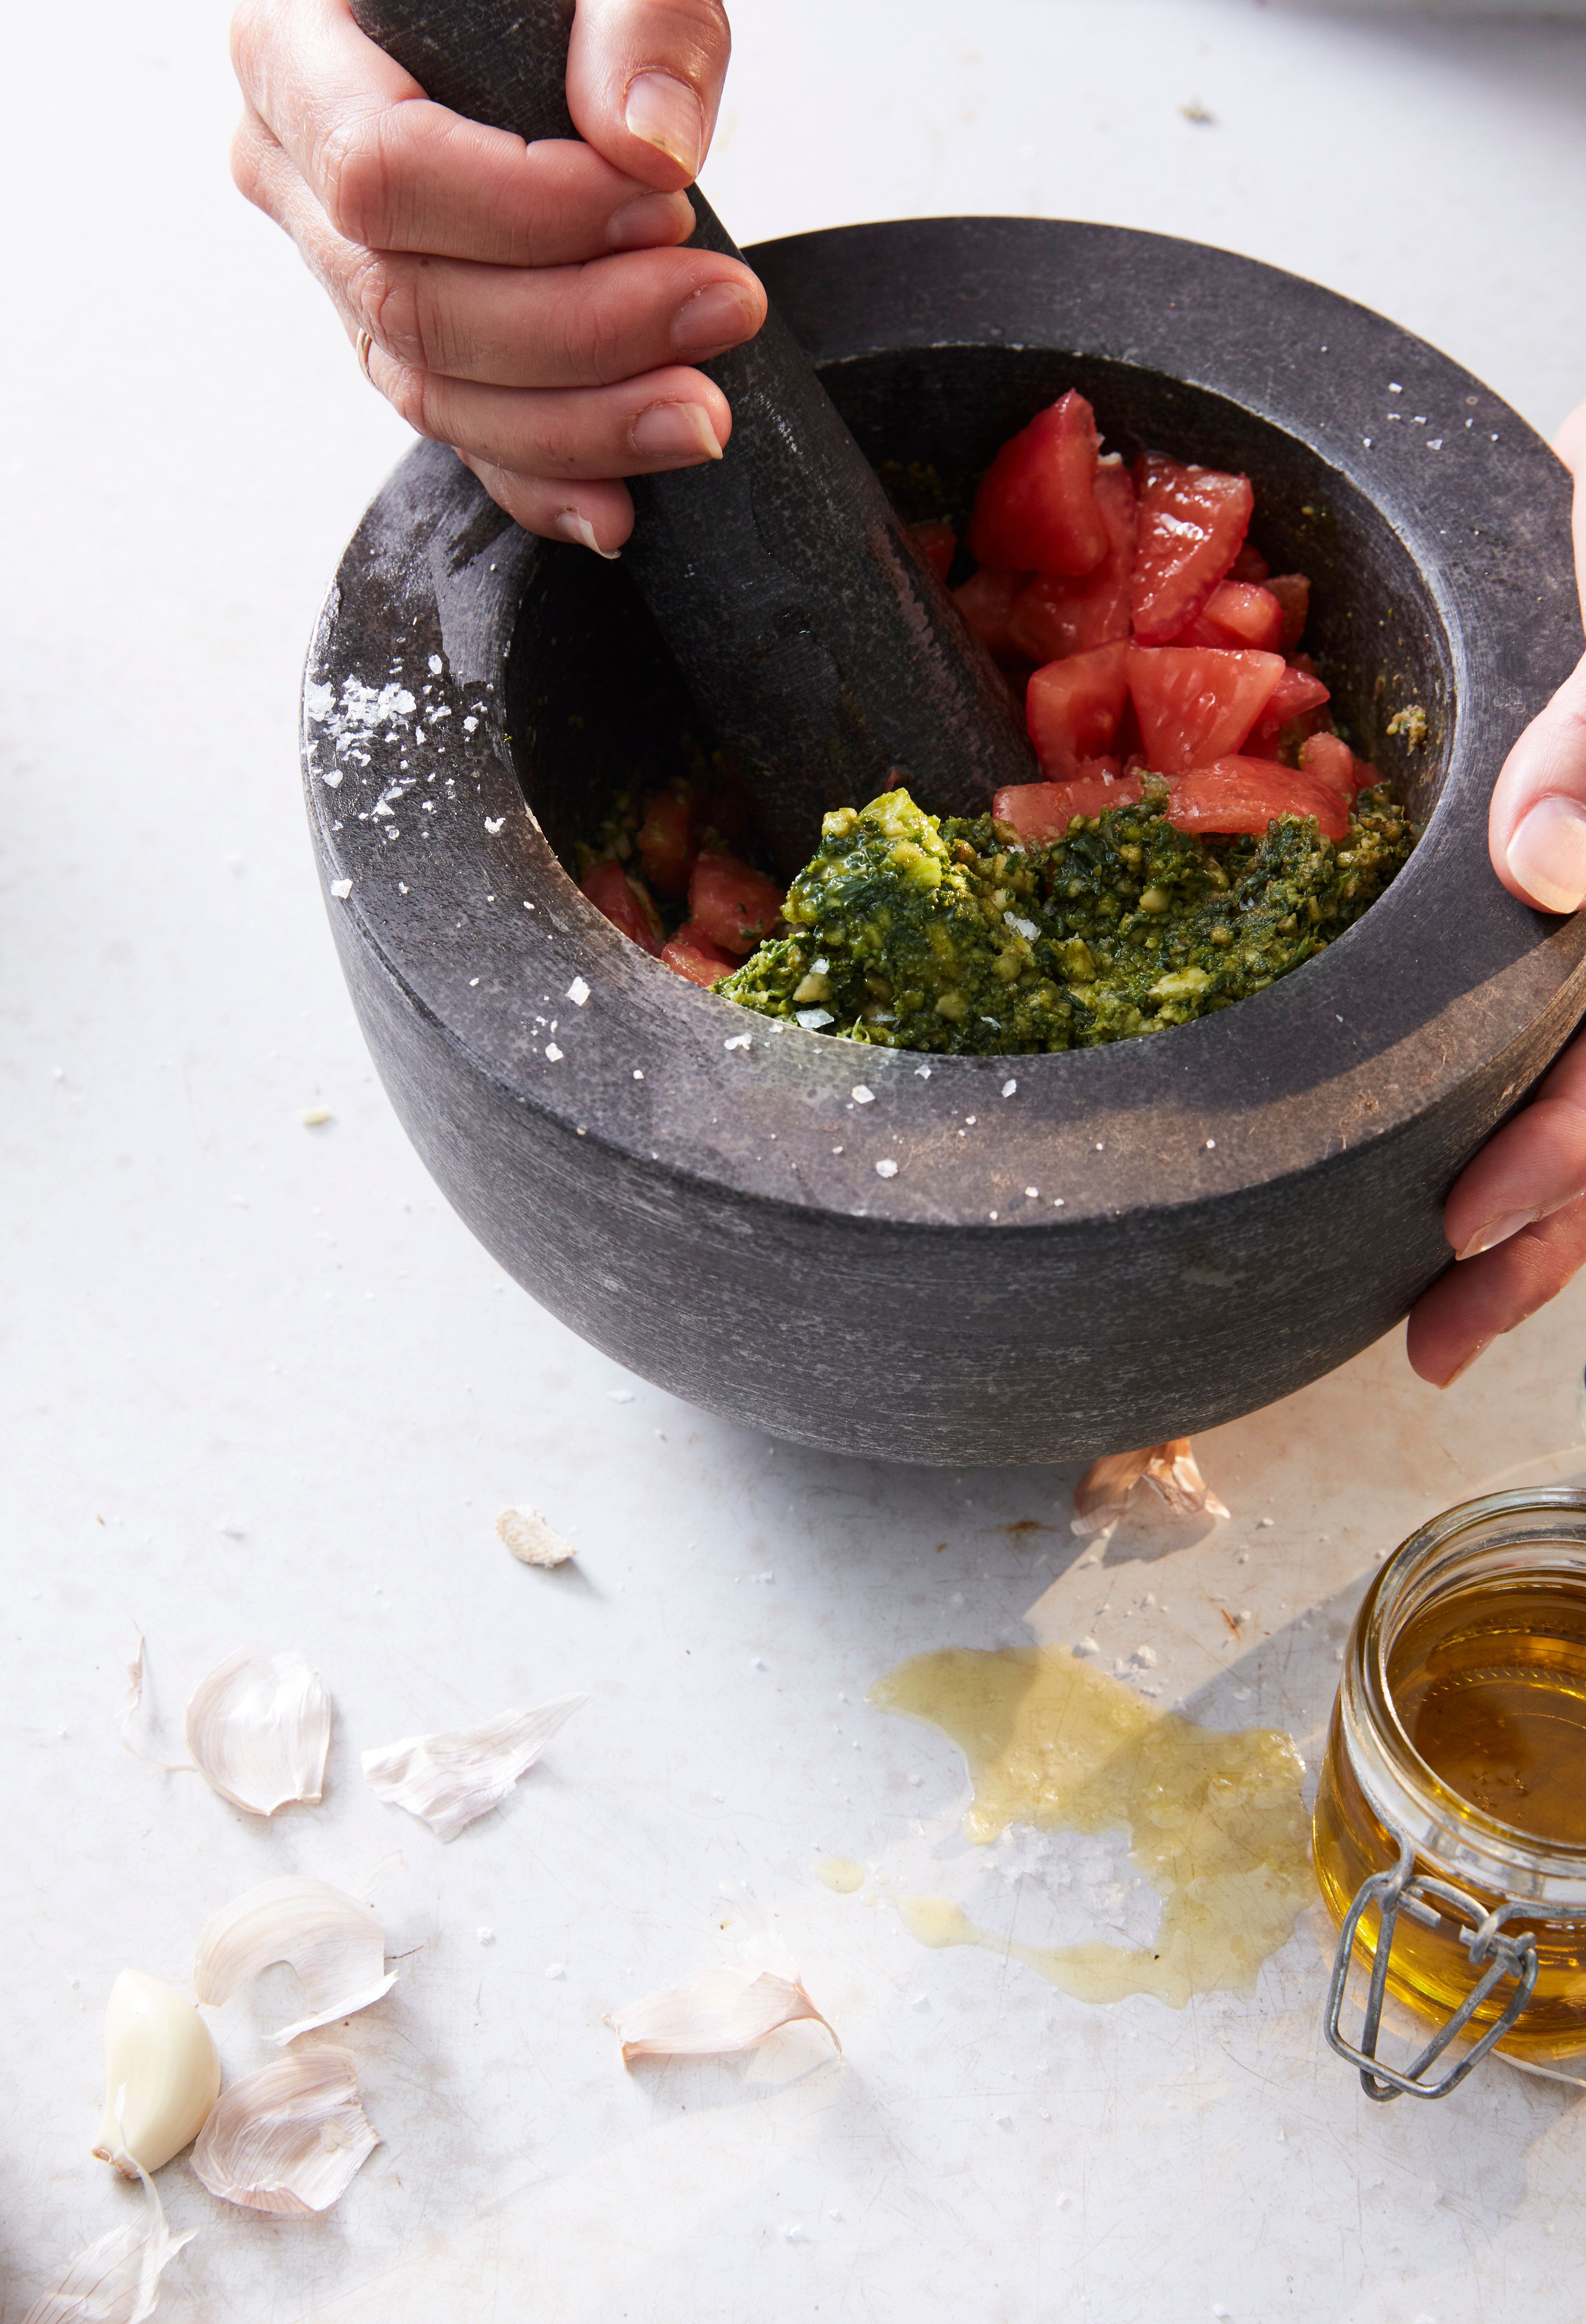 Pesto being made in a mortar & pestle